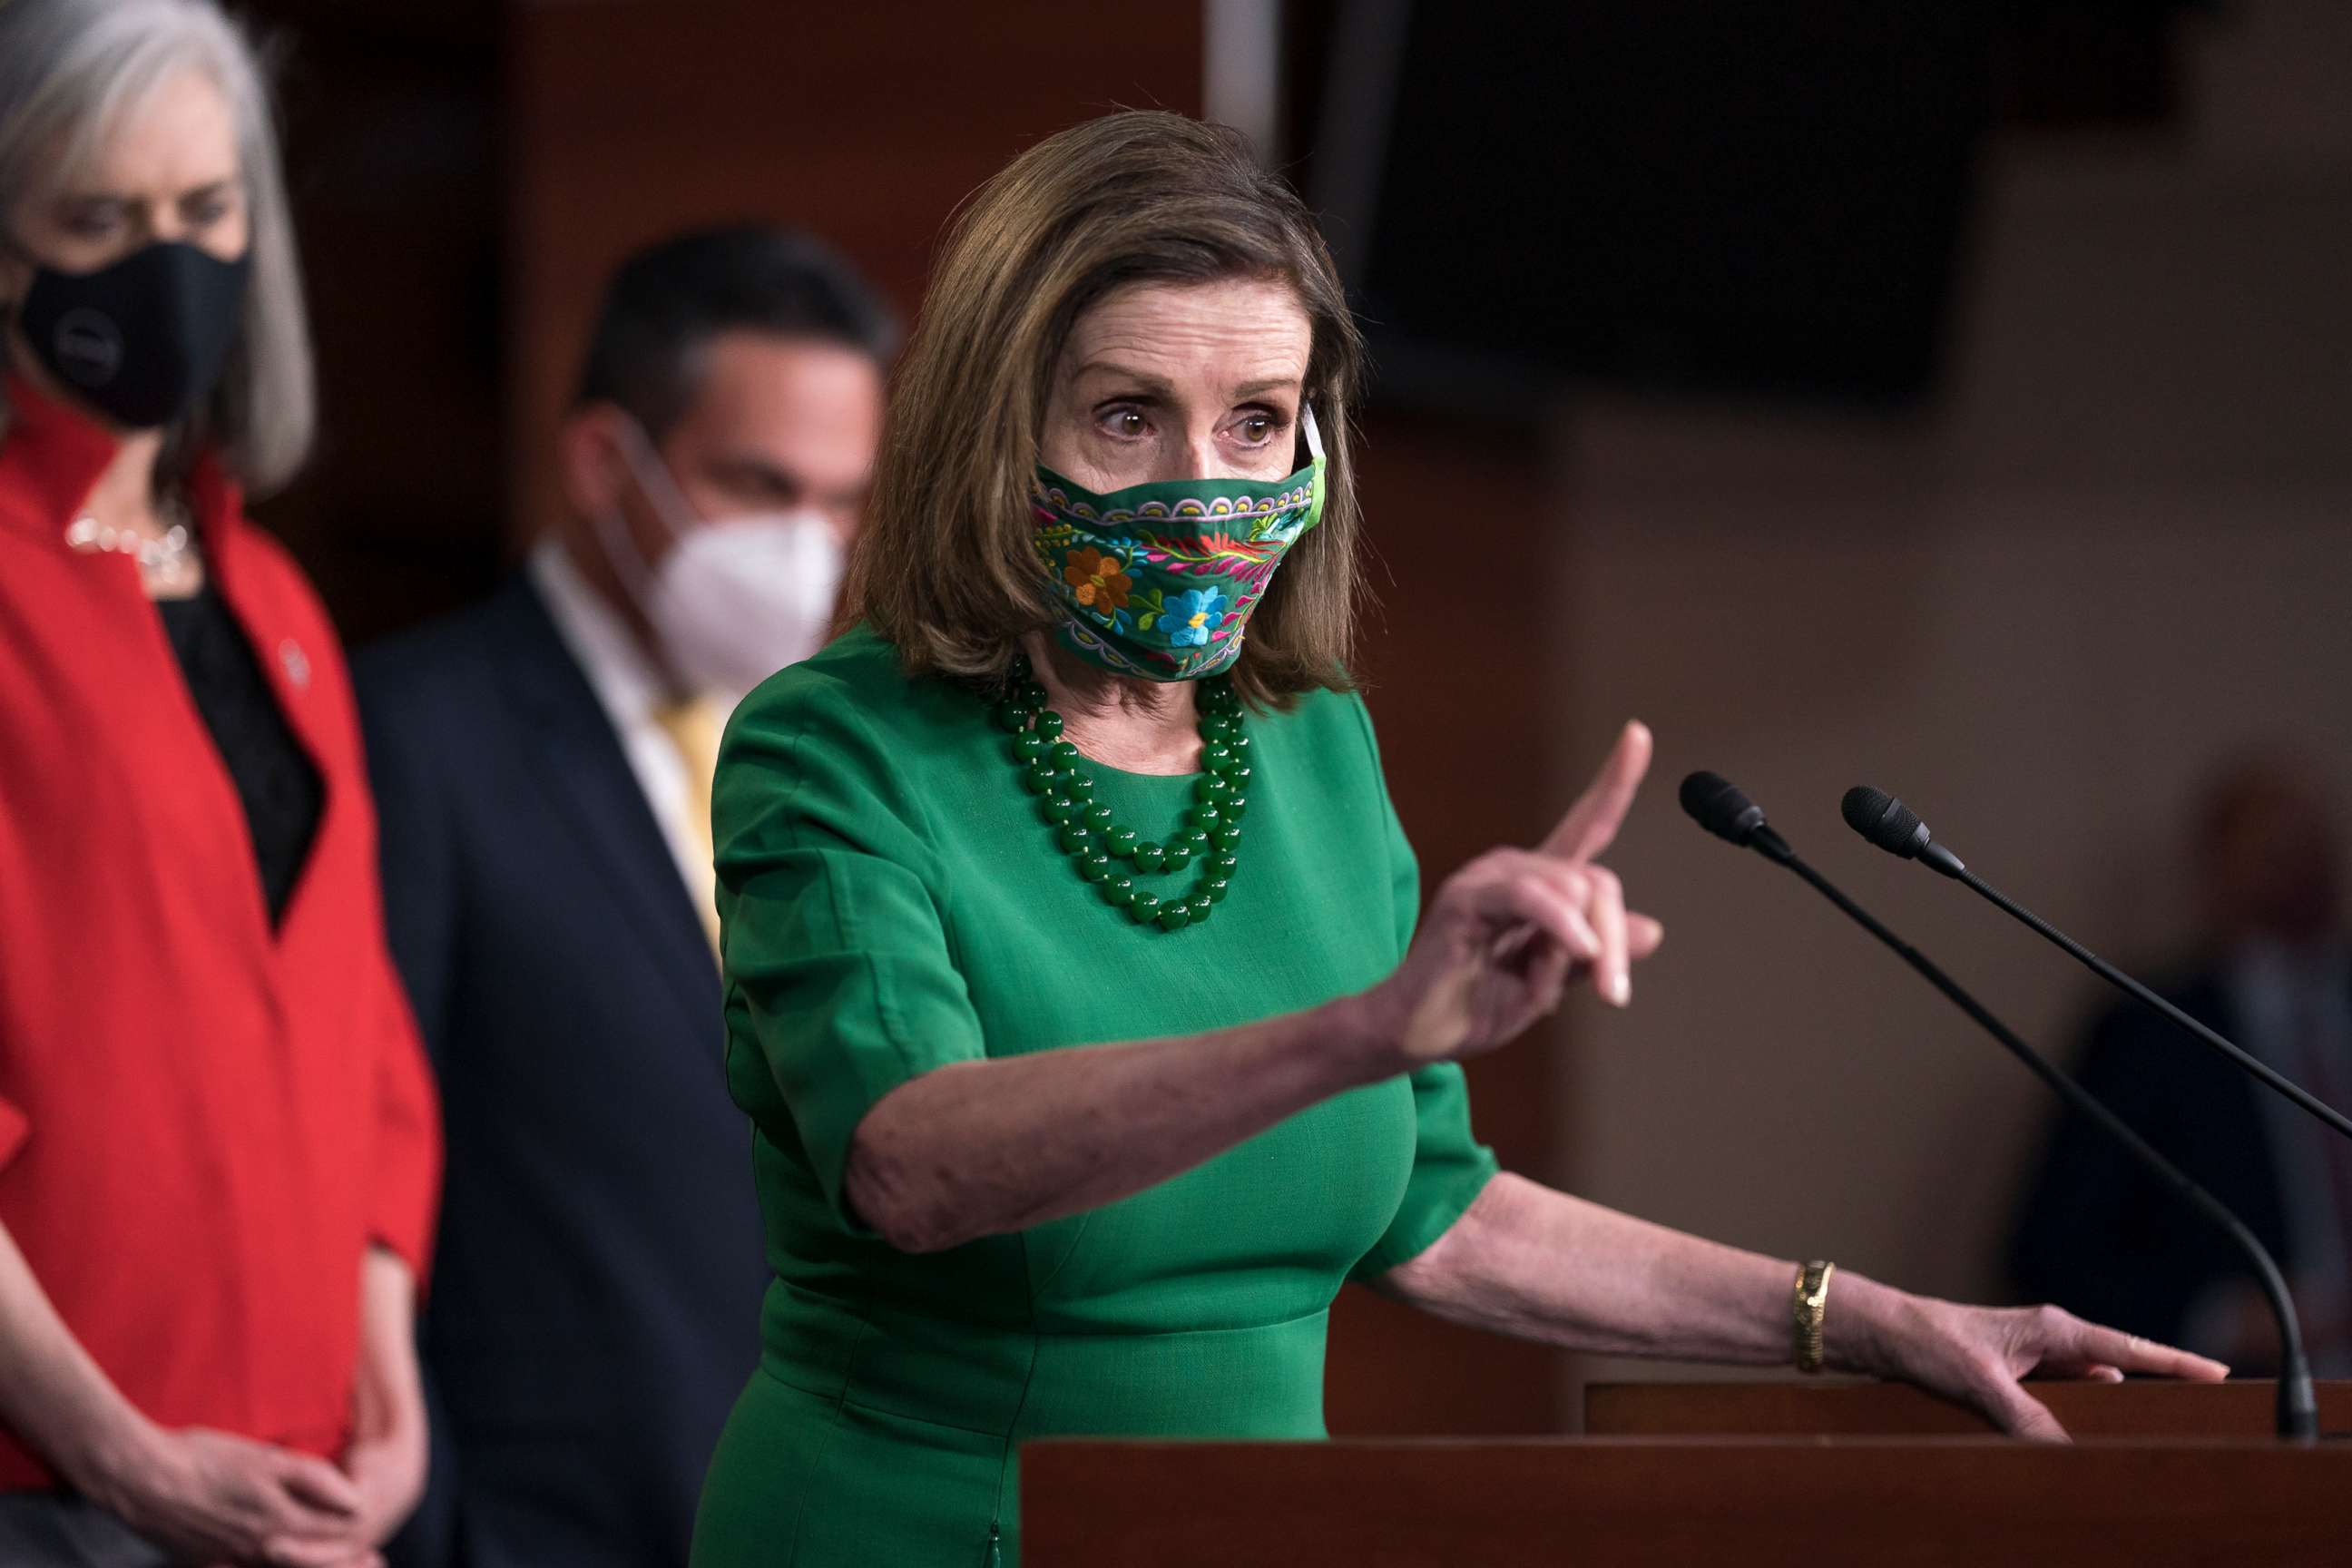 PHOTO: Speaker of the House Nancy Pelosi, D-Calif., meets with reporters before the House votes to pass a $1.9 trillion pandemic relief package, during a news conference at the Capitol in Washington, Friday, Feb. 26, 2021.